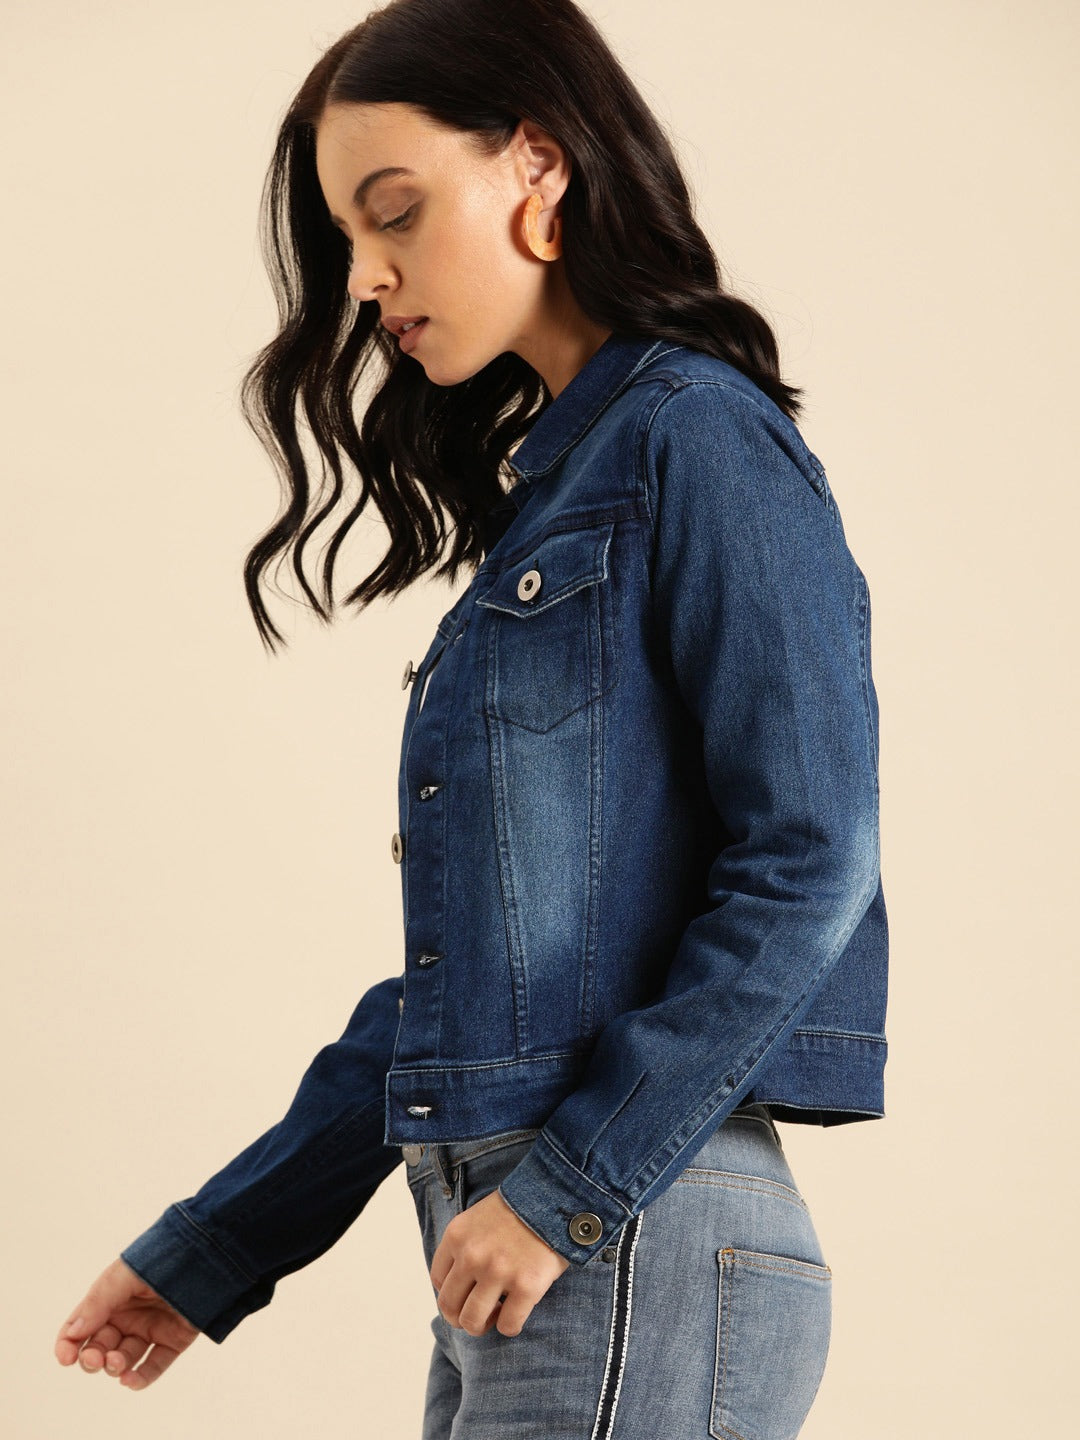 Dark blue washed denim jacket for women, featuring a classic collar and button-up design.